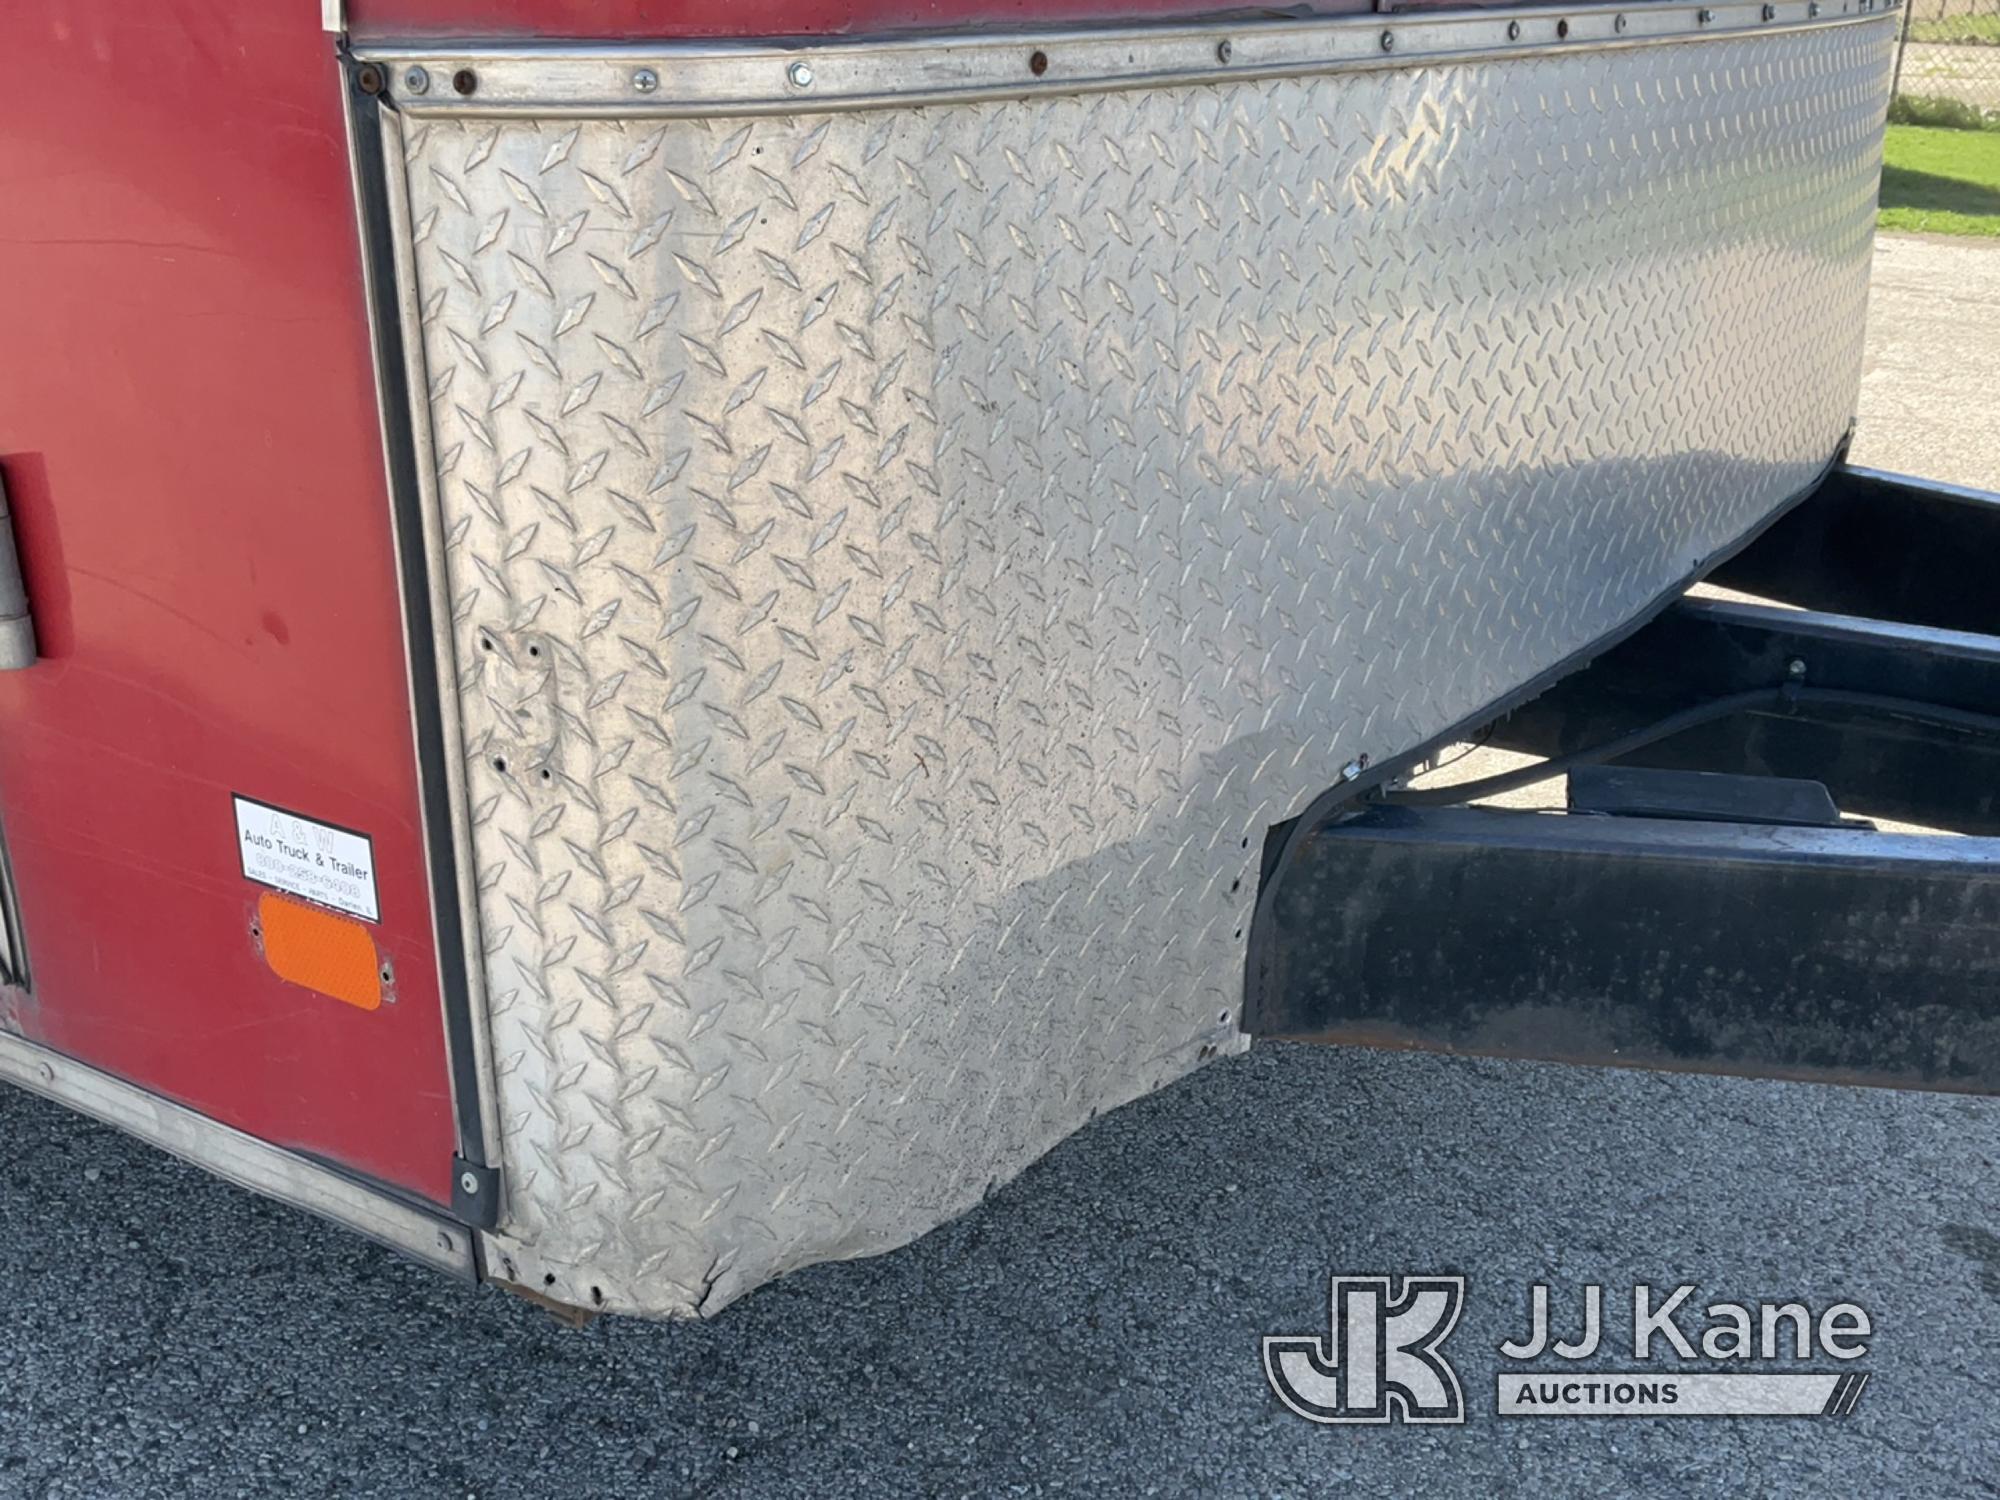 (South Beloit, IL) 2006 Royal Cargo, LLC T/A Enclosed Cargo Trailer Side Door Does Not Work